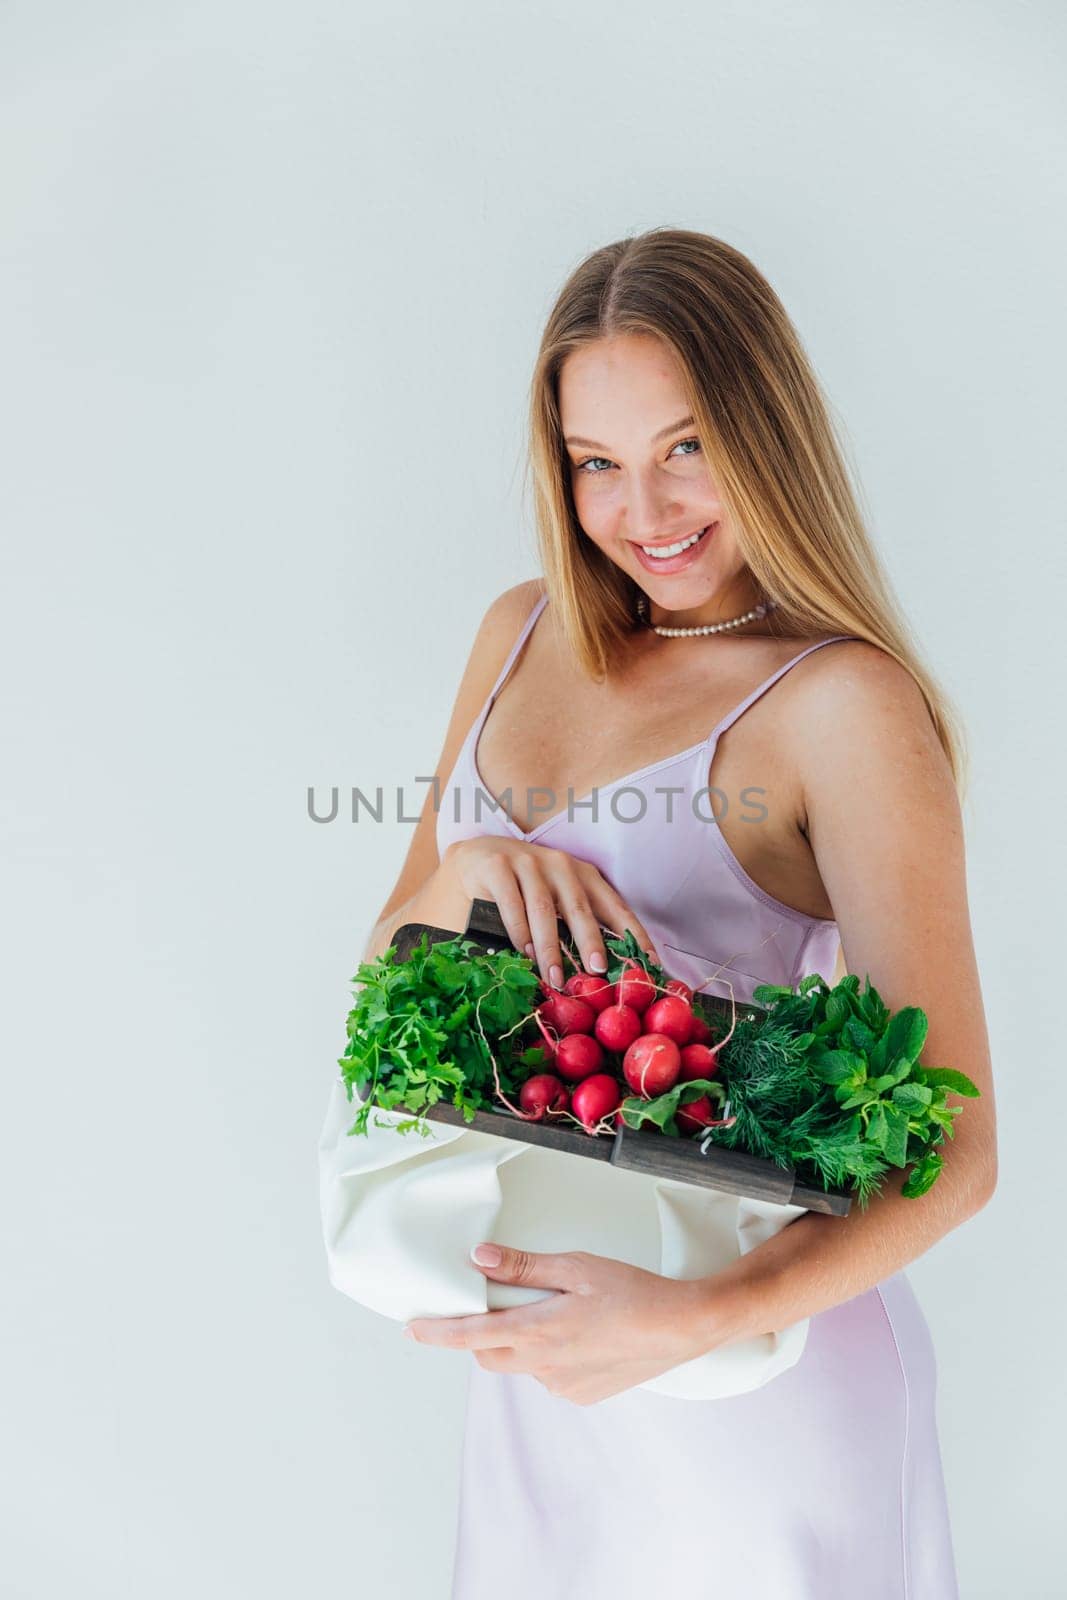 Beautiful woman holding clutch with vegetables for eating by Simakov